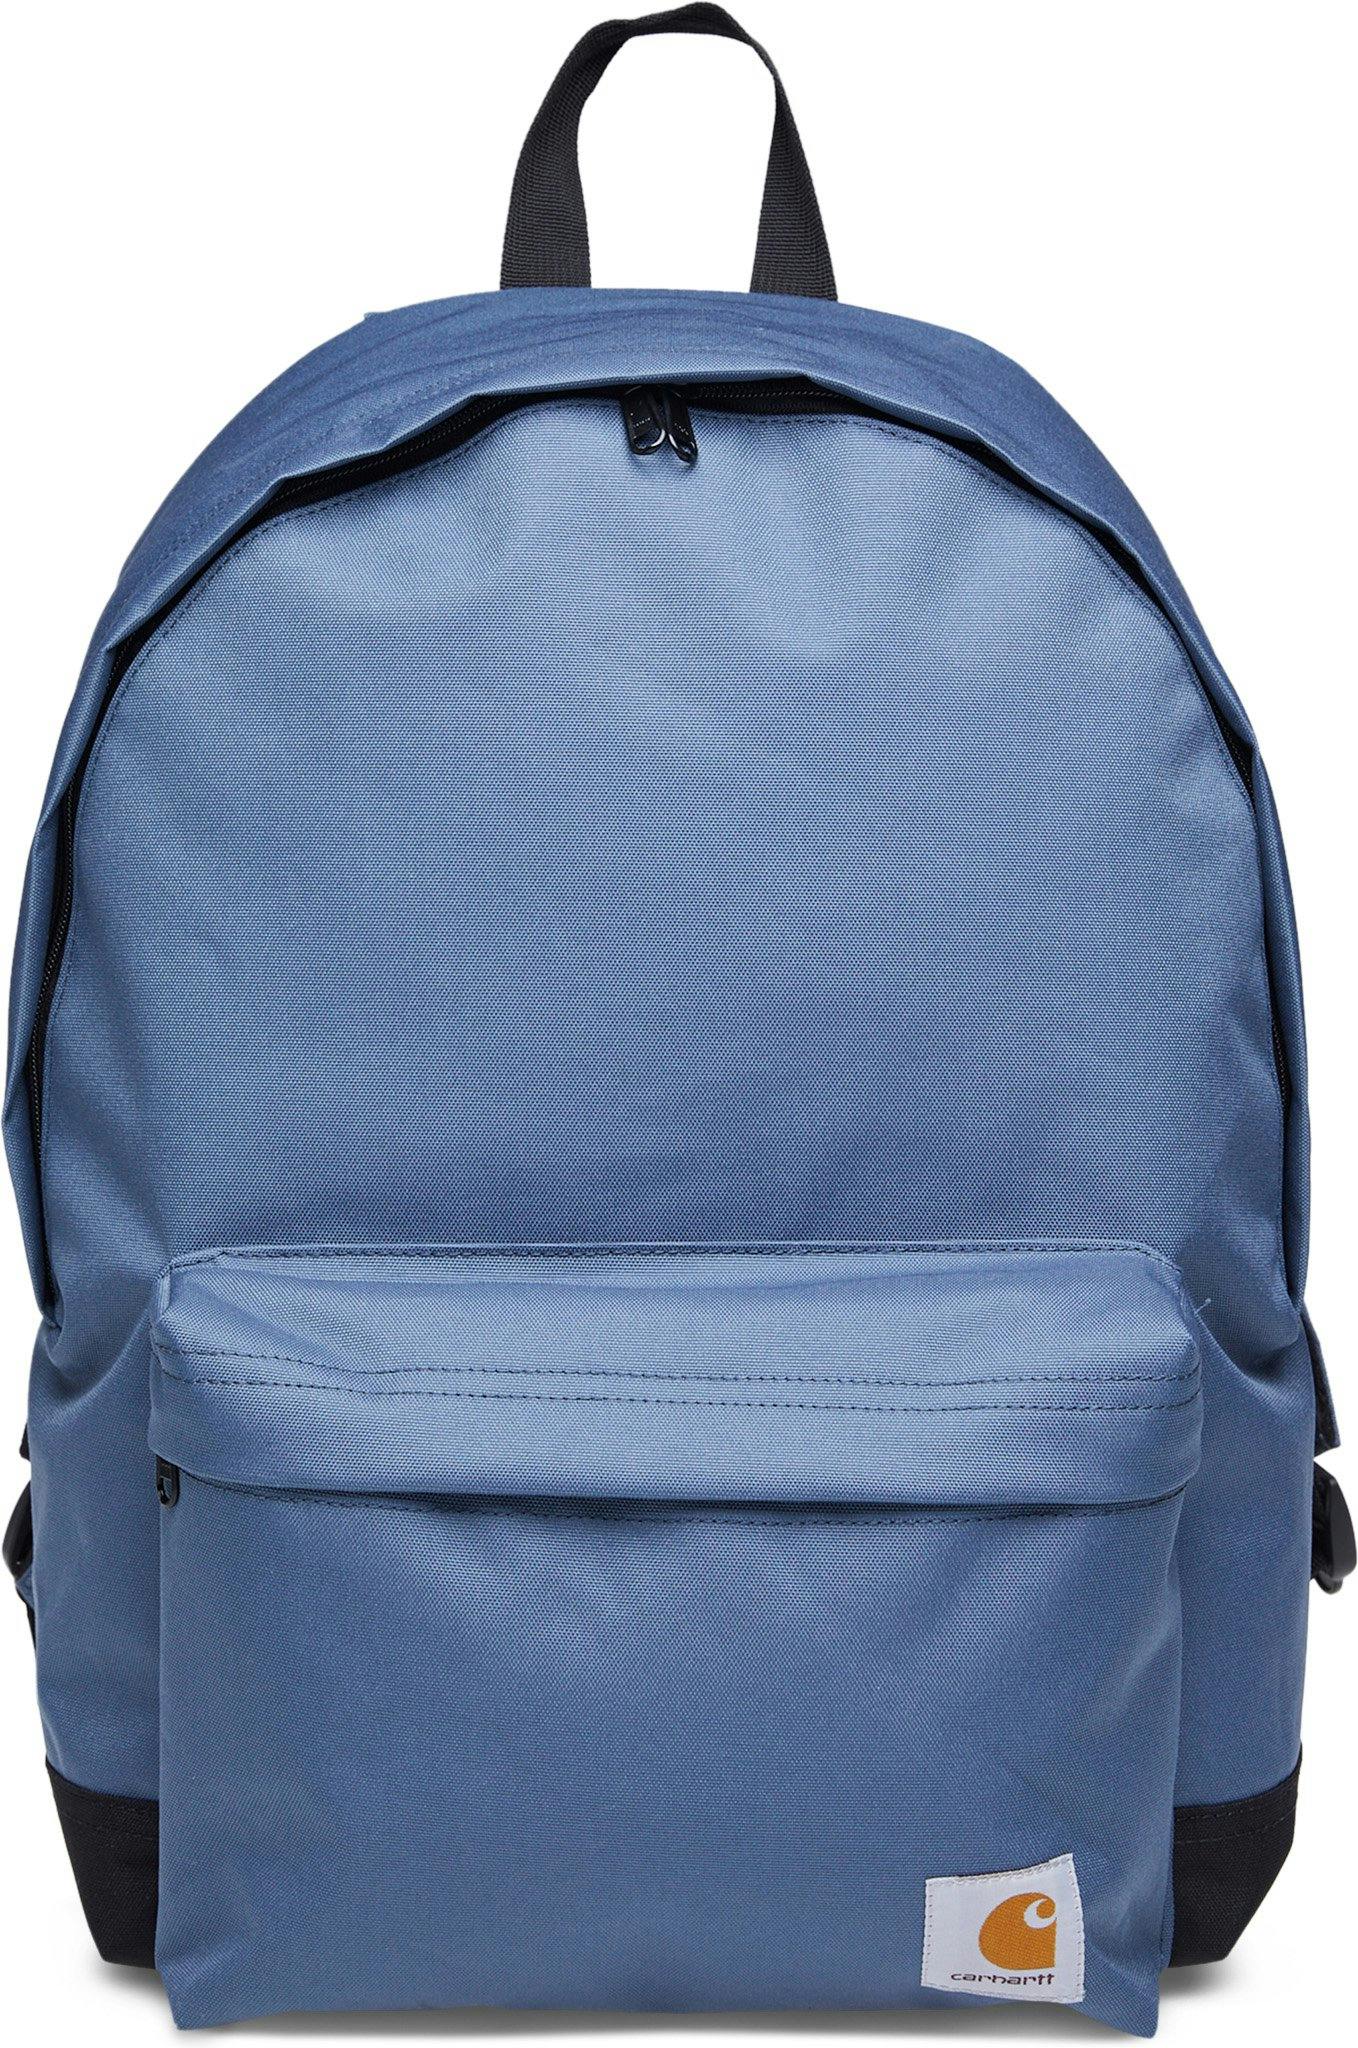 Product image for Jake Backpack 18L